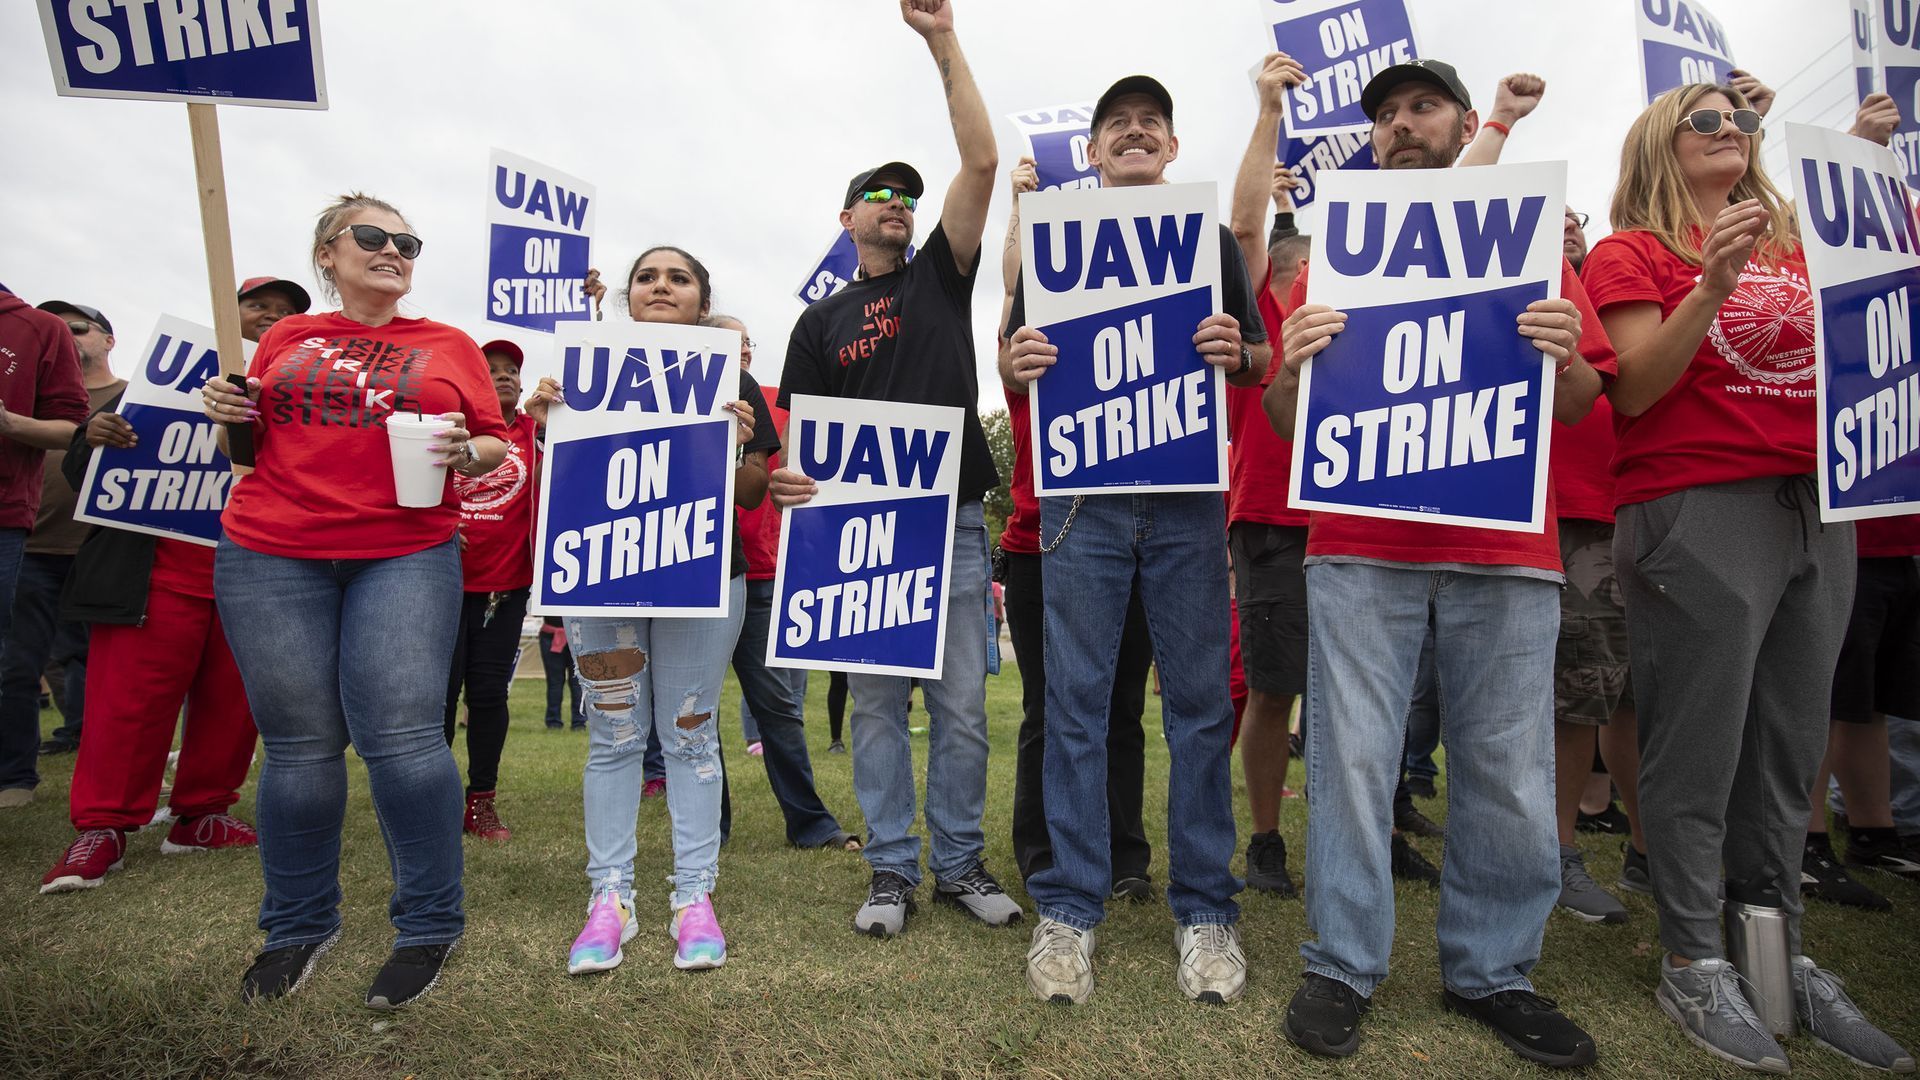 Workers hold picket signs supporting the UAW strike